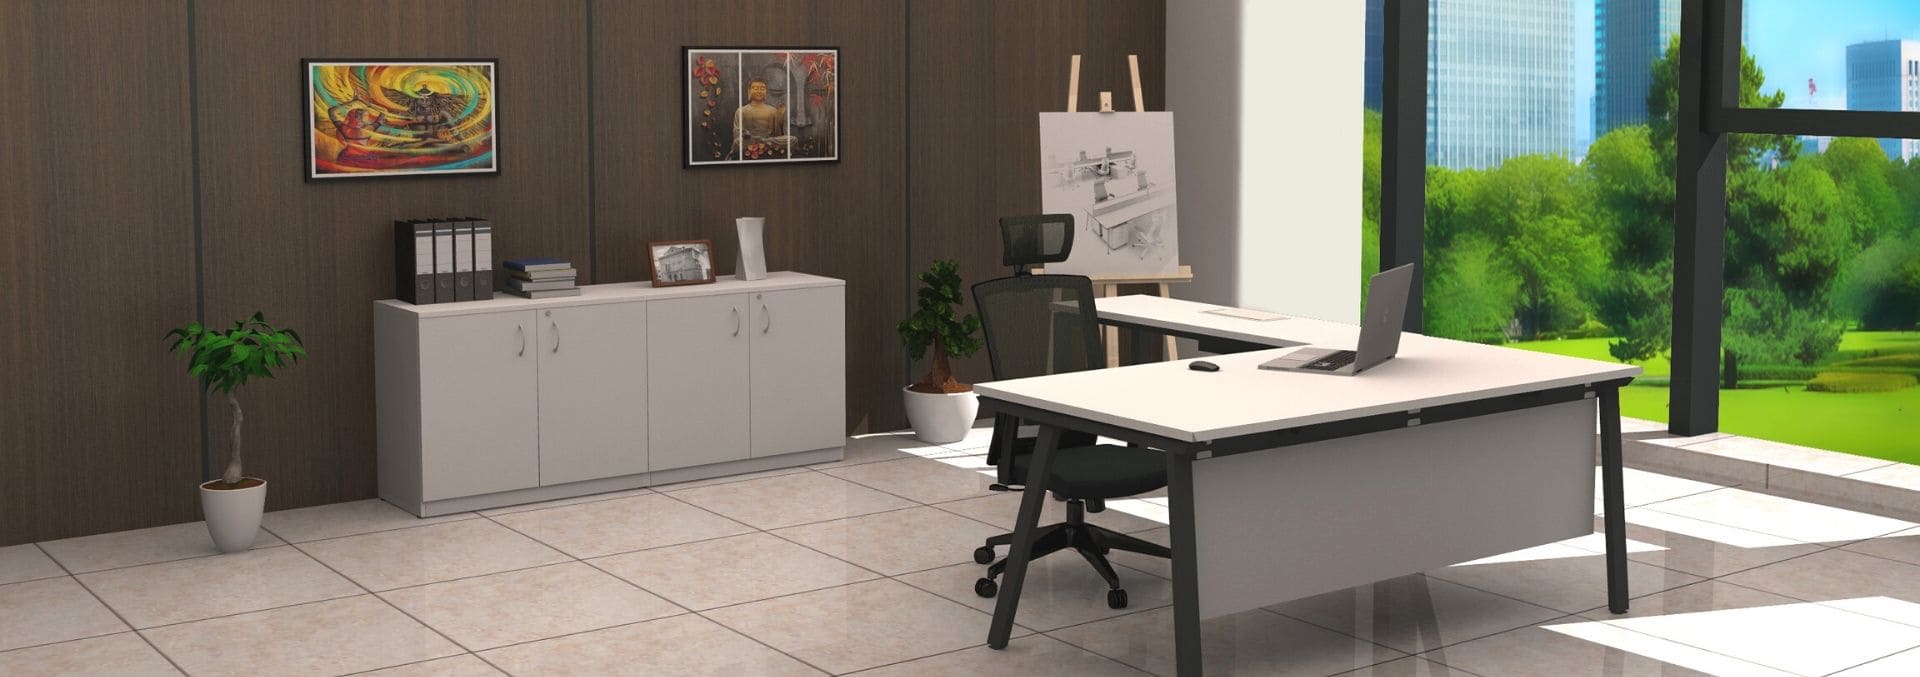 Workplace interior having modern Lounge seatings installed